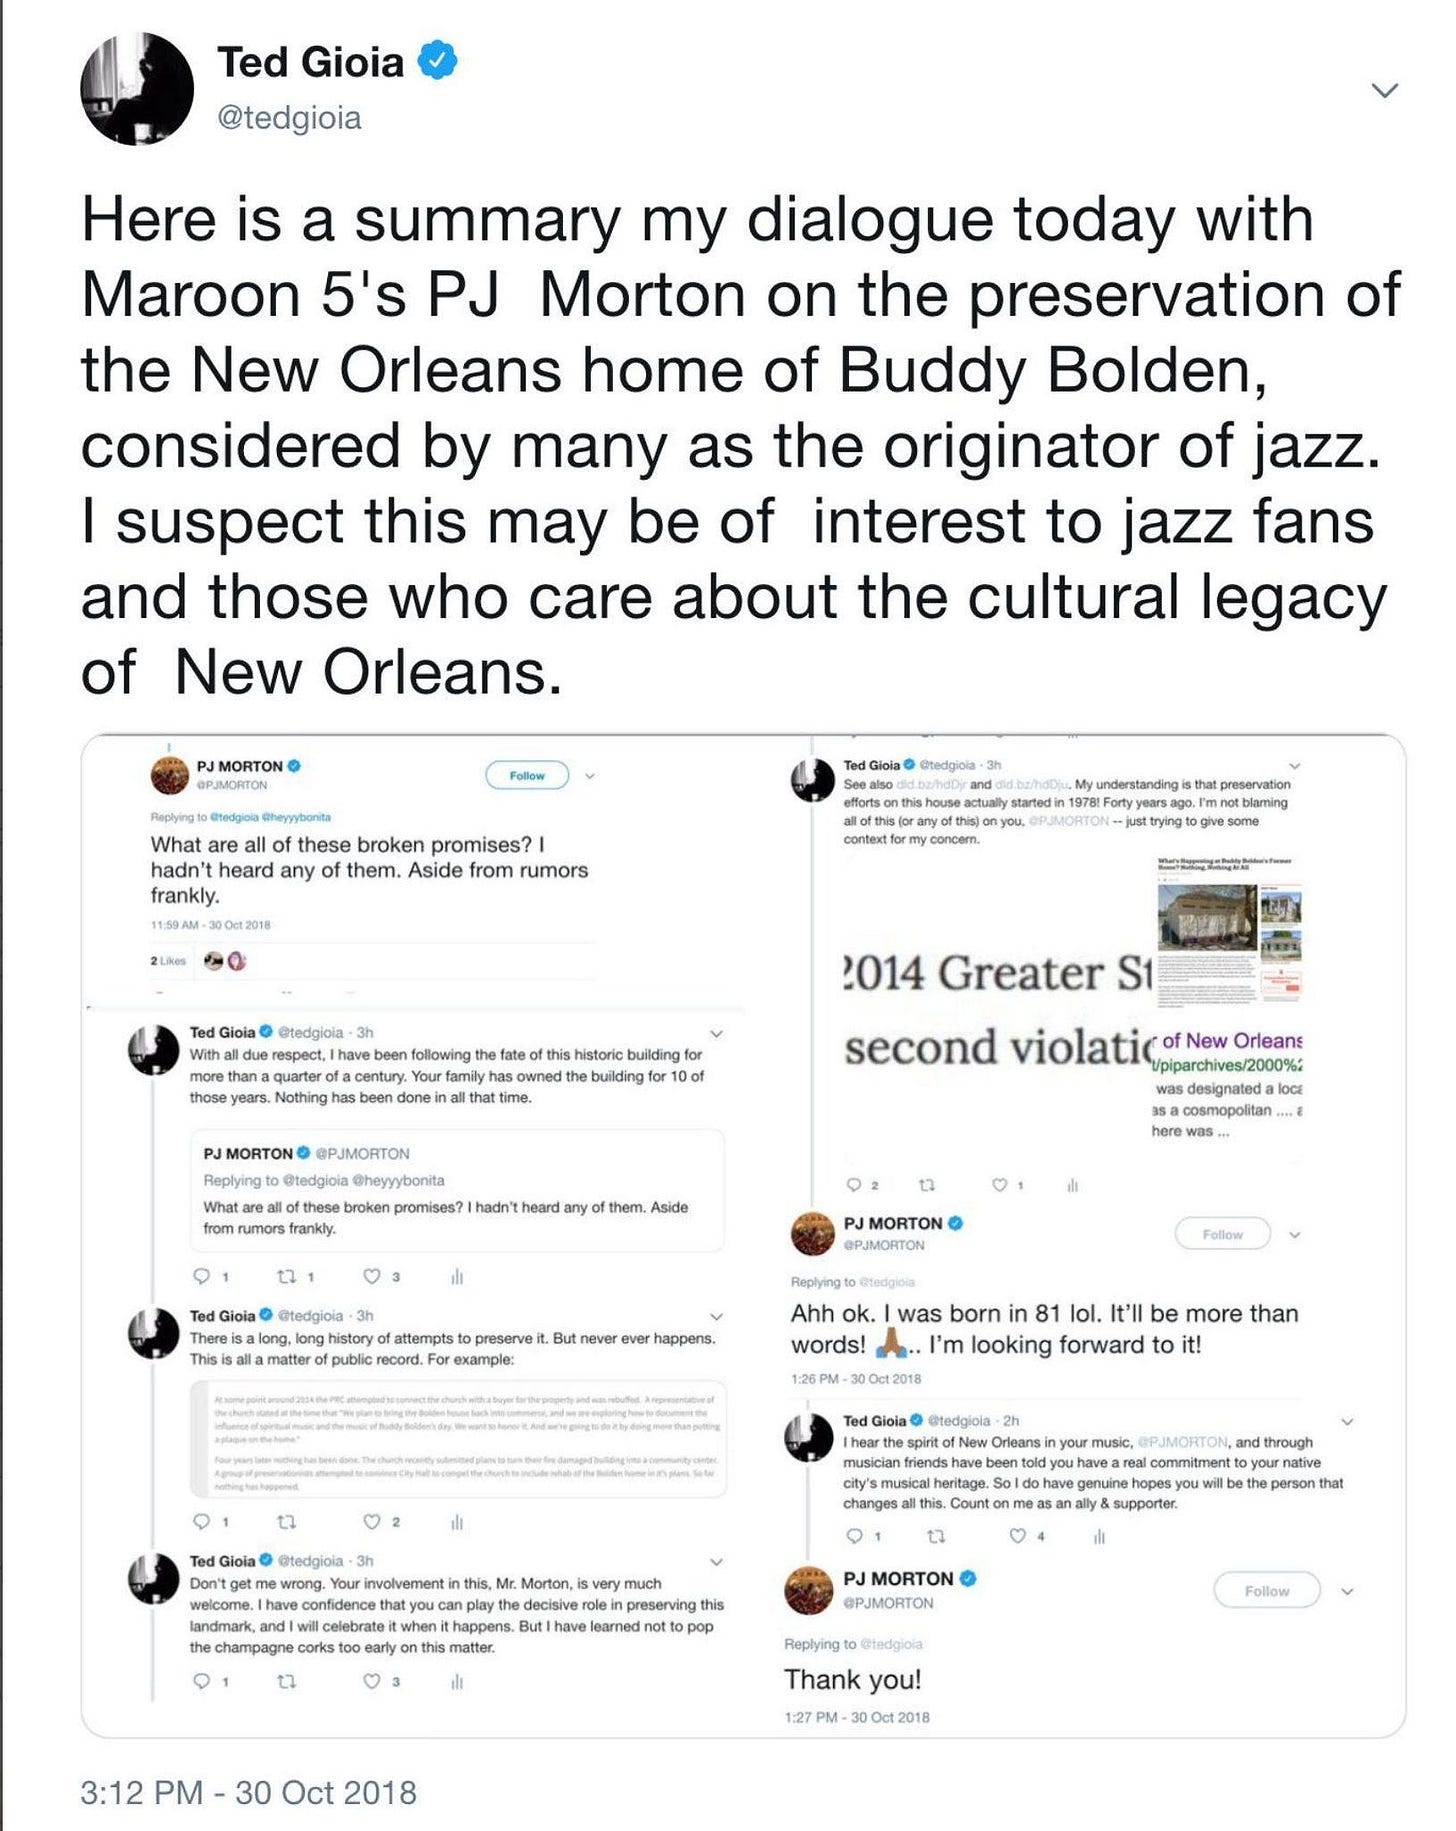 Tweets from PJ Morton about the Buddy Bolden house